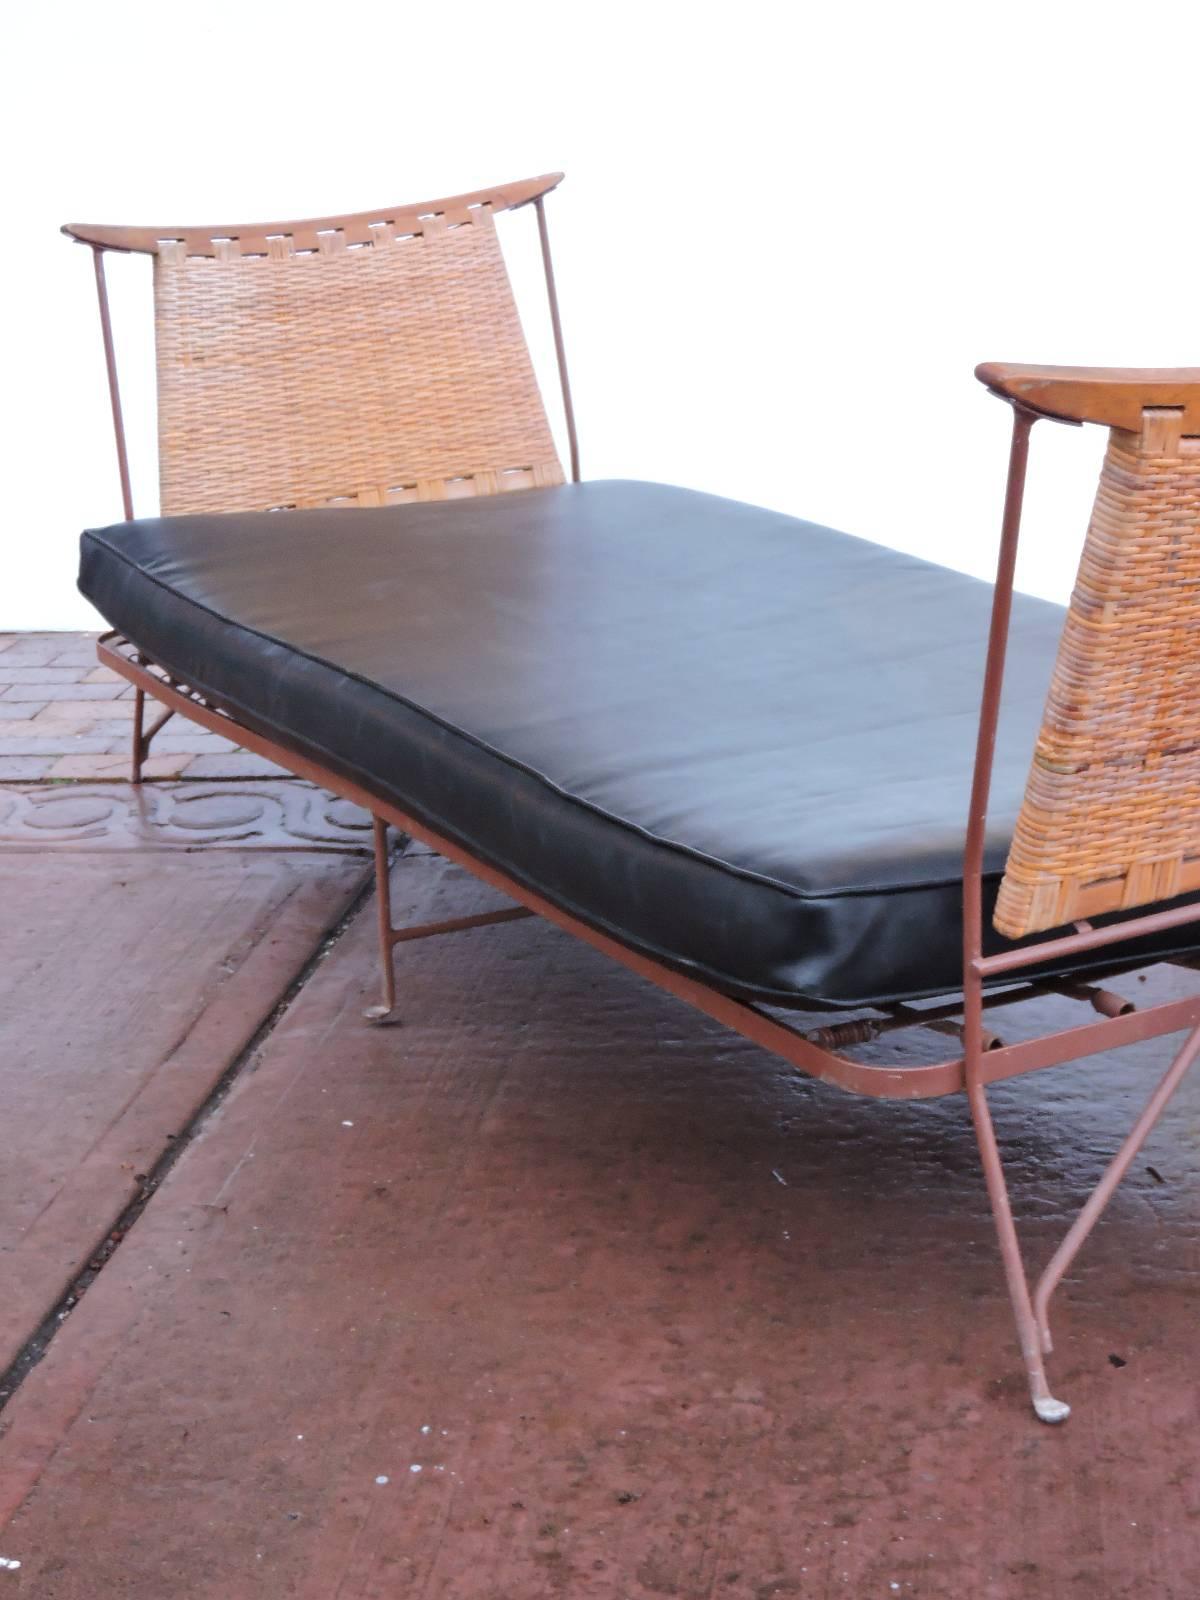  Rare Modernist Iron & Cane Daybed Lounge 3